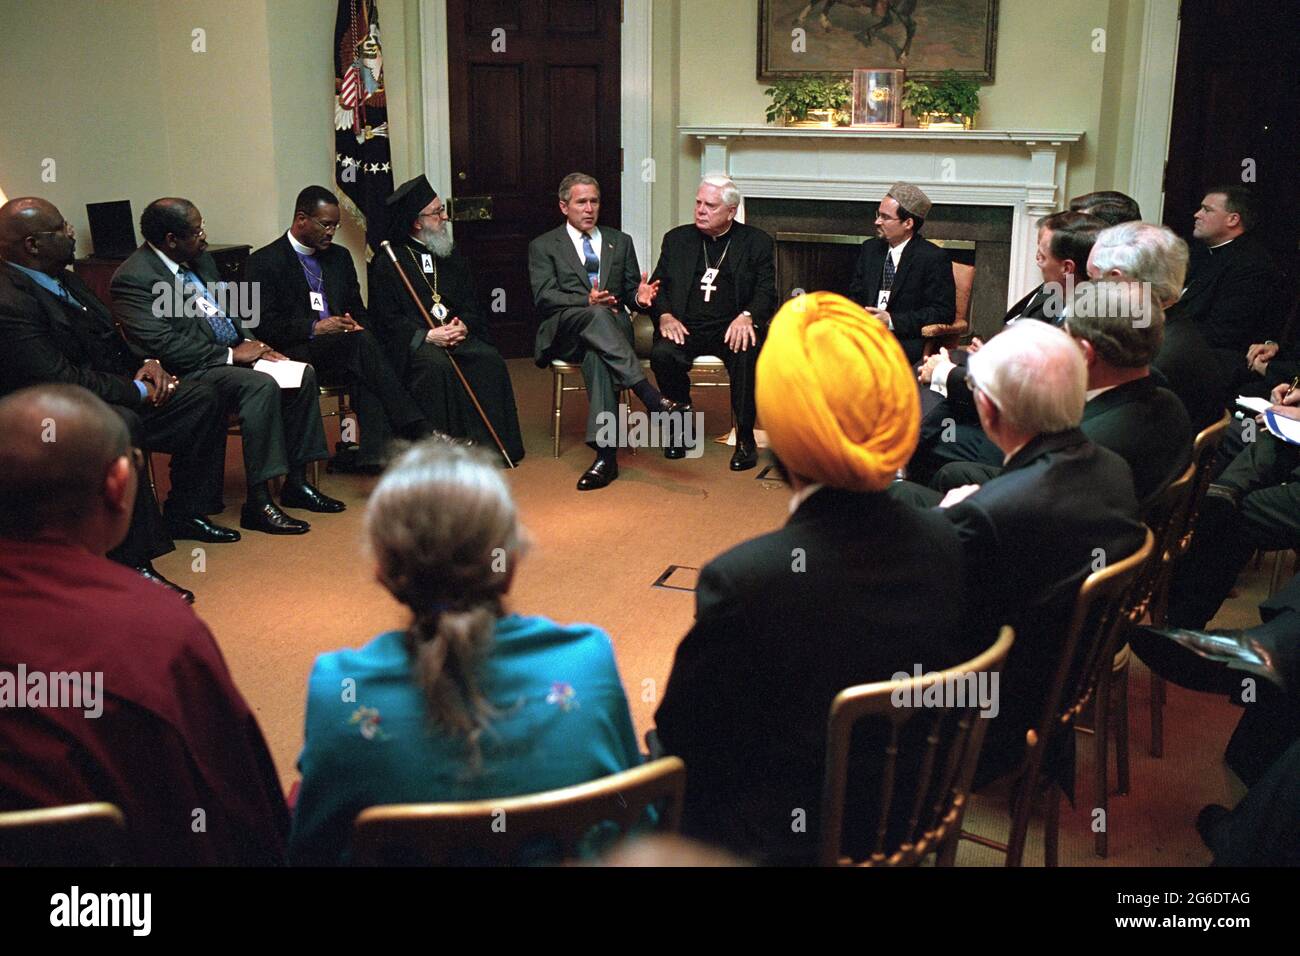 President George W. Bush meets with religious leaders Thursday, Sept. 20, 2001, in the Roosevelt Room of the White House.  Photo by Tina Hager, Courtesy of the George W. Bush Presidential Library Stock Photo